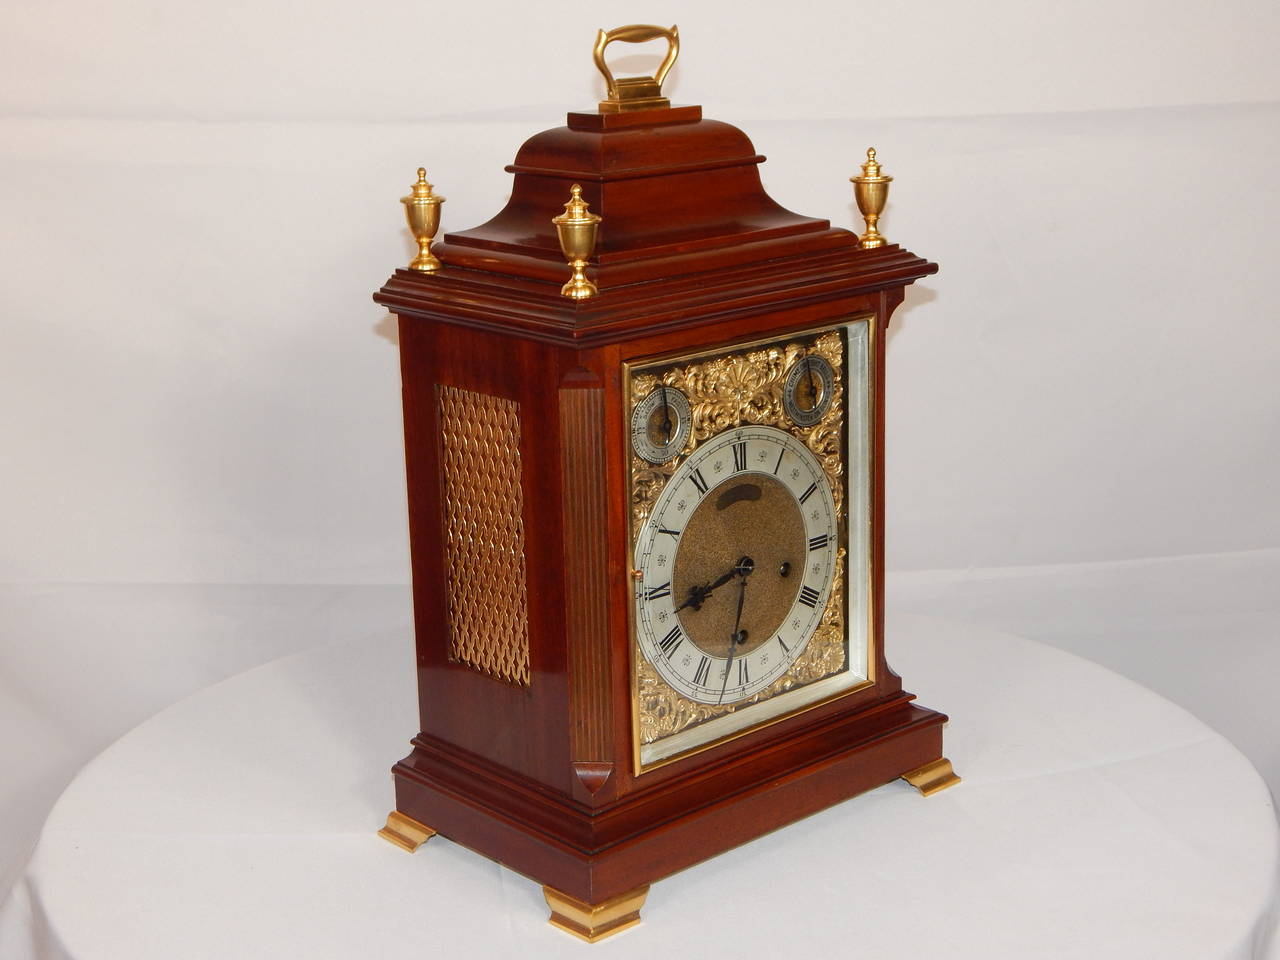 Every quarter hour this clock strikes on the sweetest rack of bells or if you prefer, gongs! It sounds just like a finely tuned music box.
The clock is in running condition. German made, with a Belgian retailer's
label on the dial, the movement